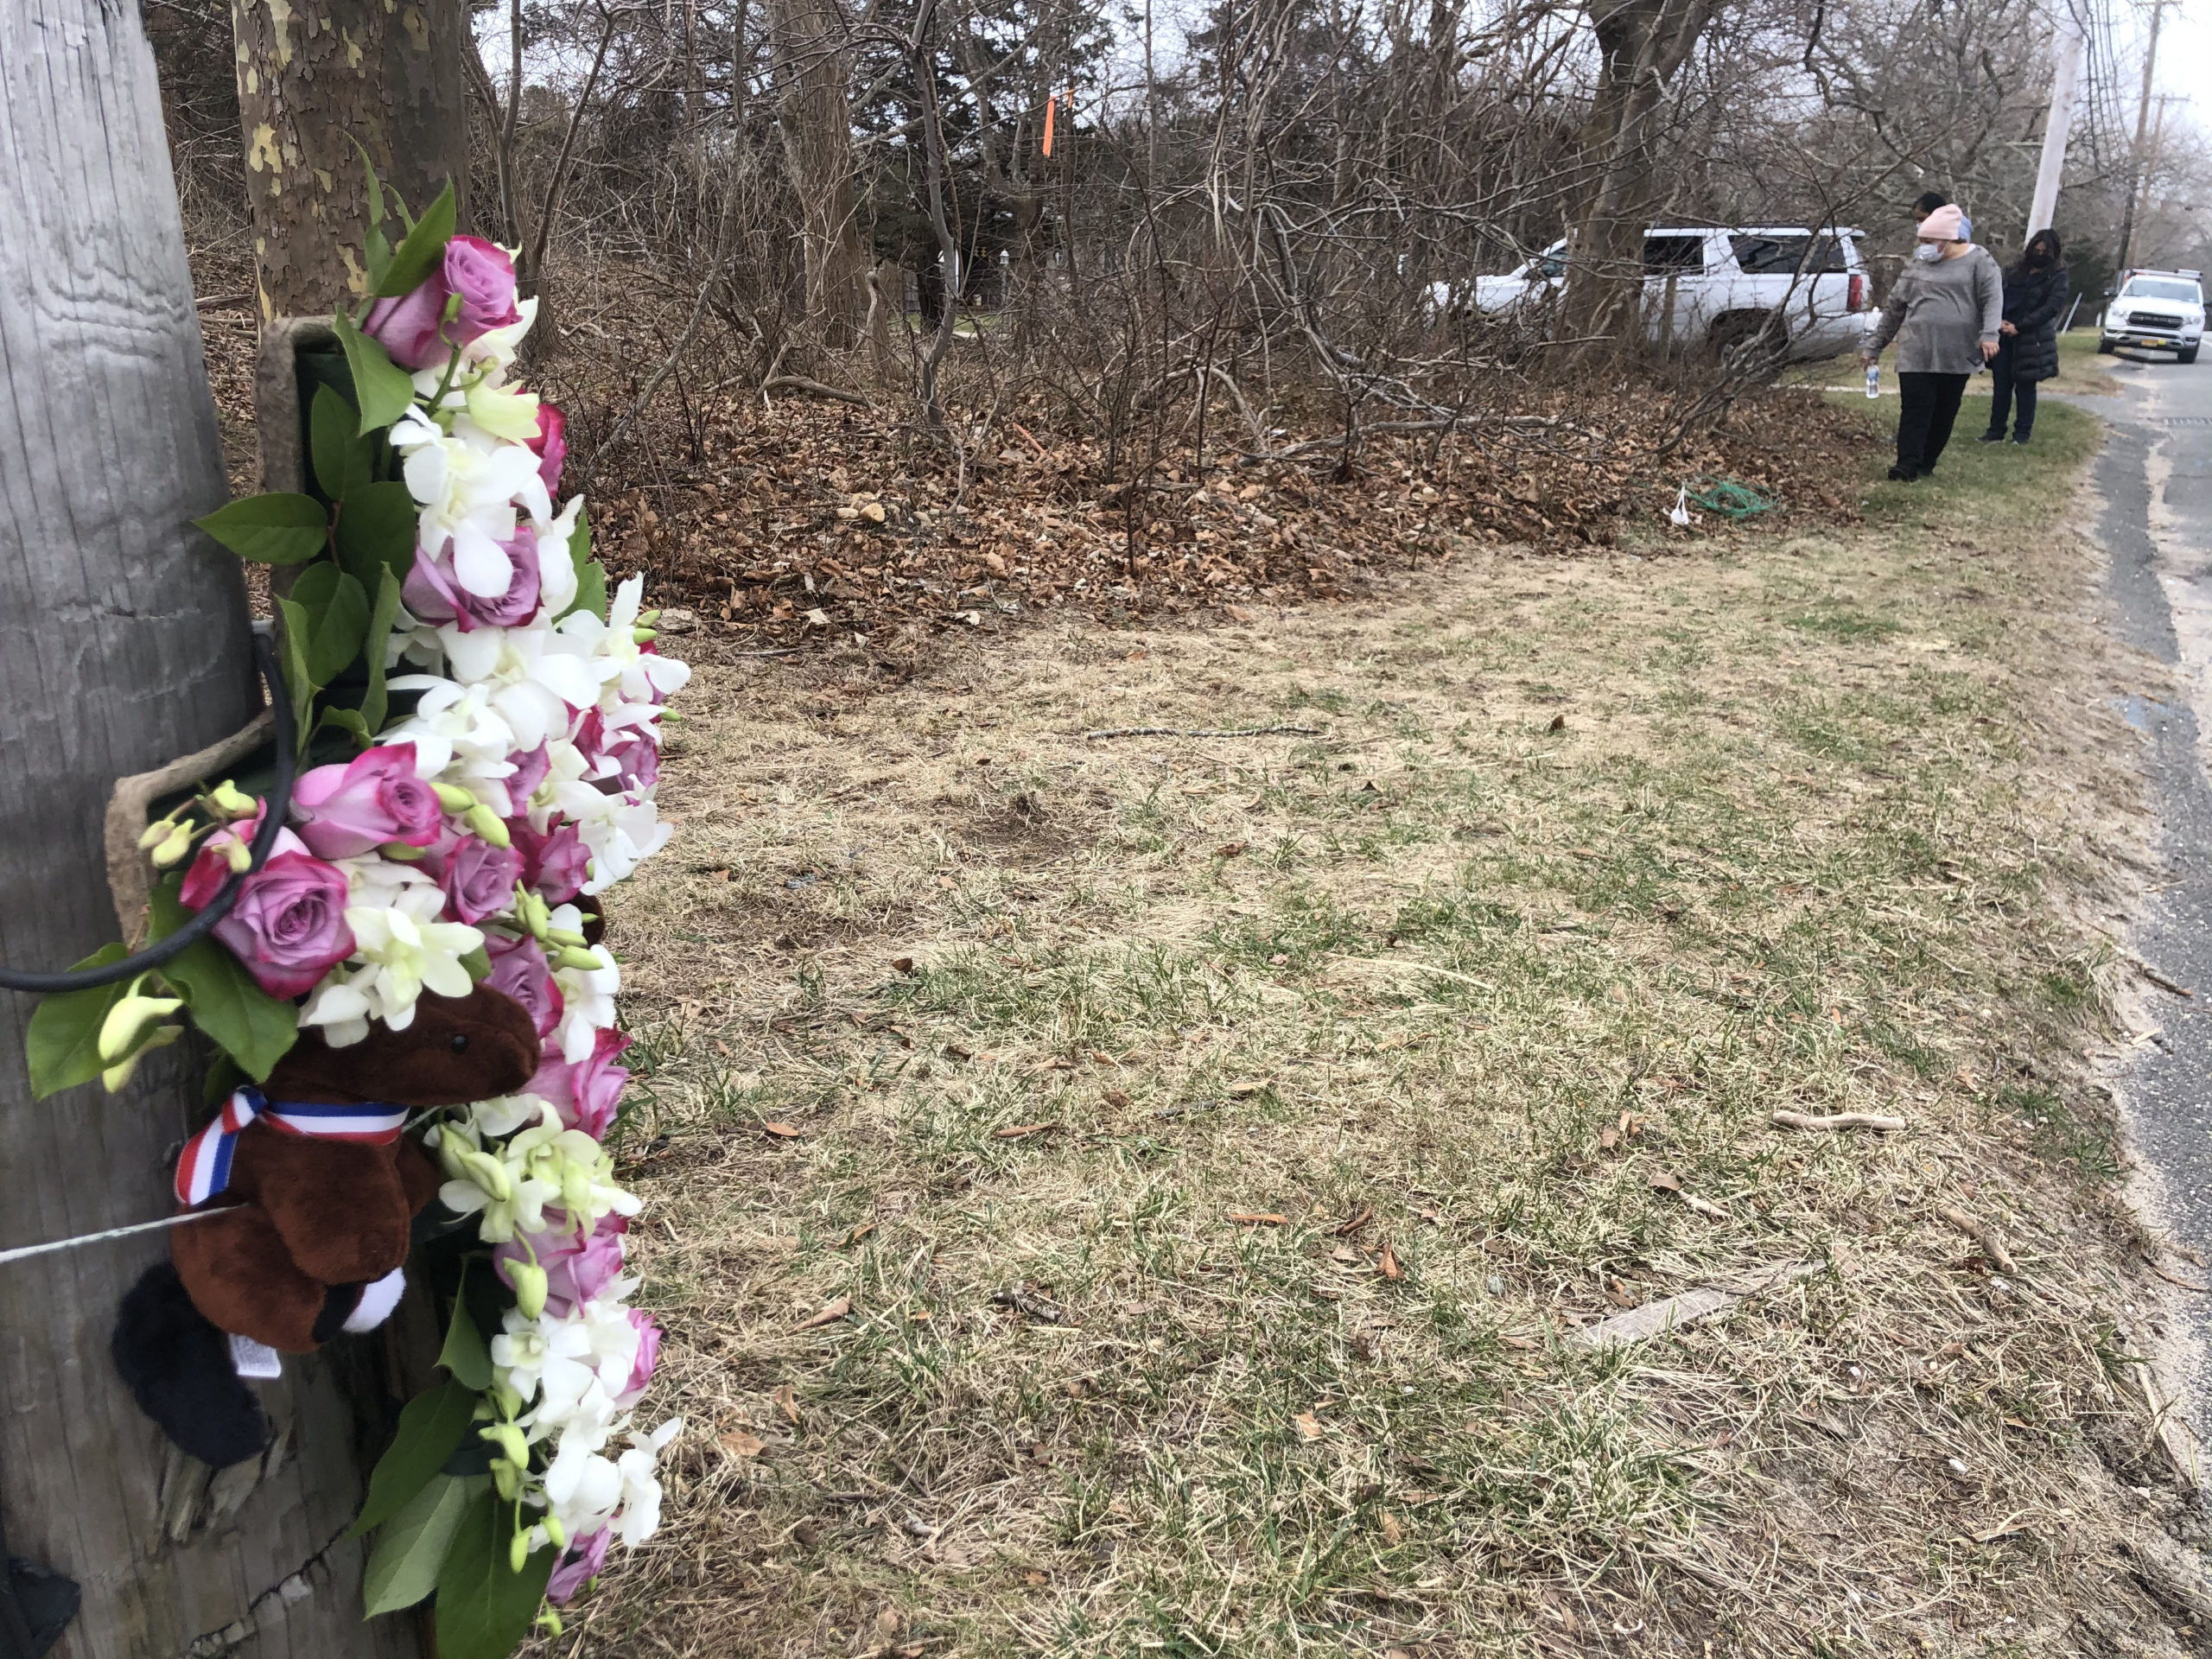 A memorial for hit and run victim Yuris Murillo Cruz has been erected near the accident site.